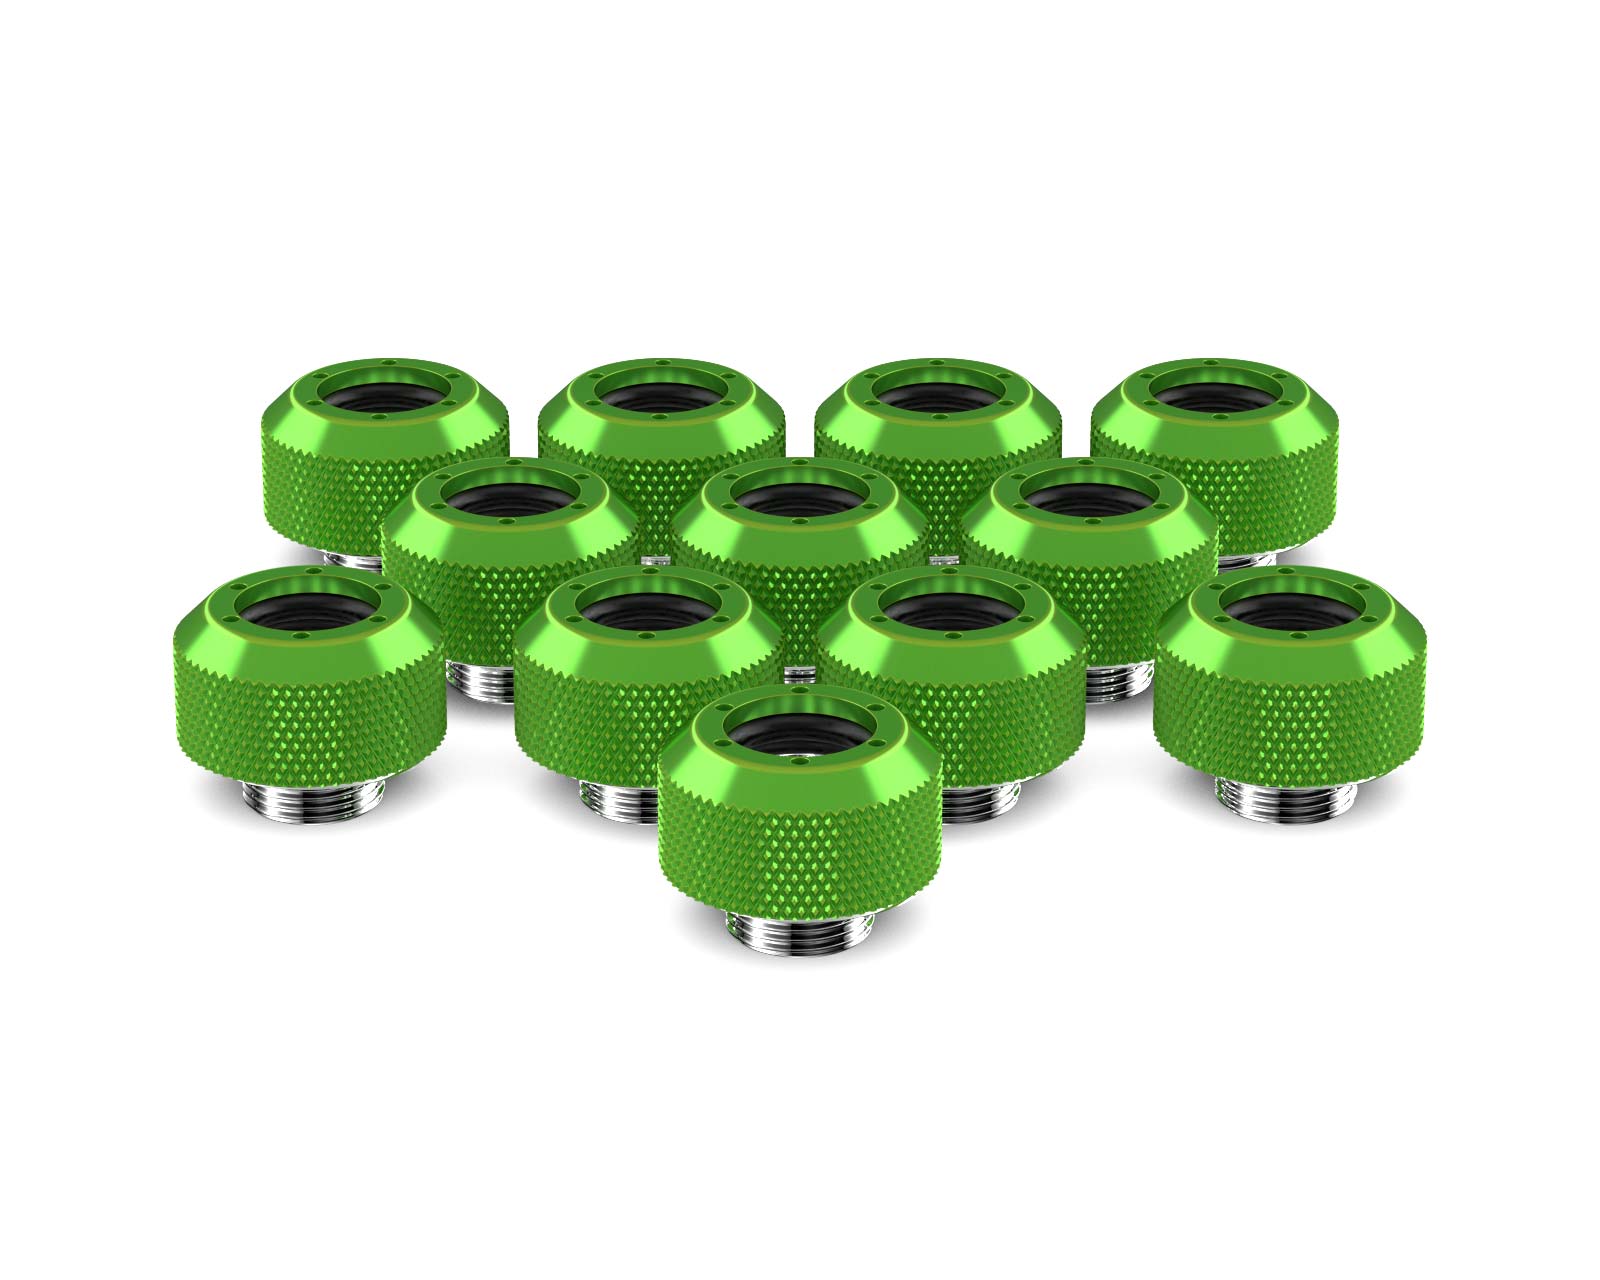 PrimoChill 1/2in. Rigid RevolverSX Series Fitting - 12 pack - PrimoChill - KEEPING IT COOL Toxic Candy